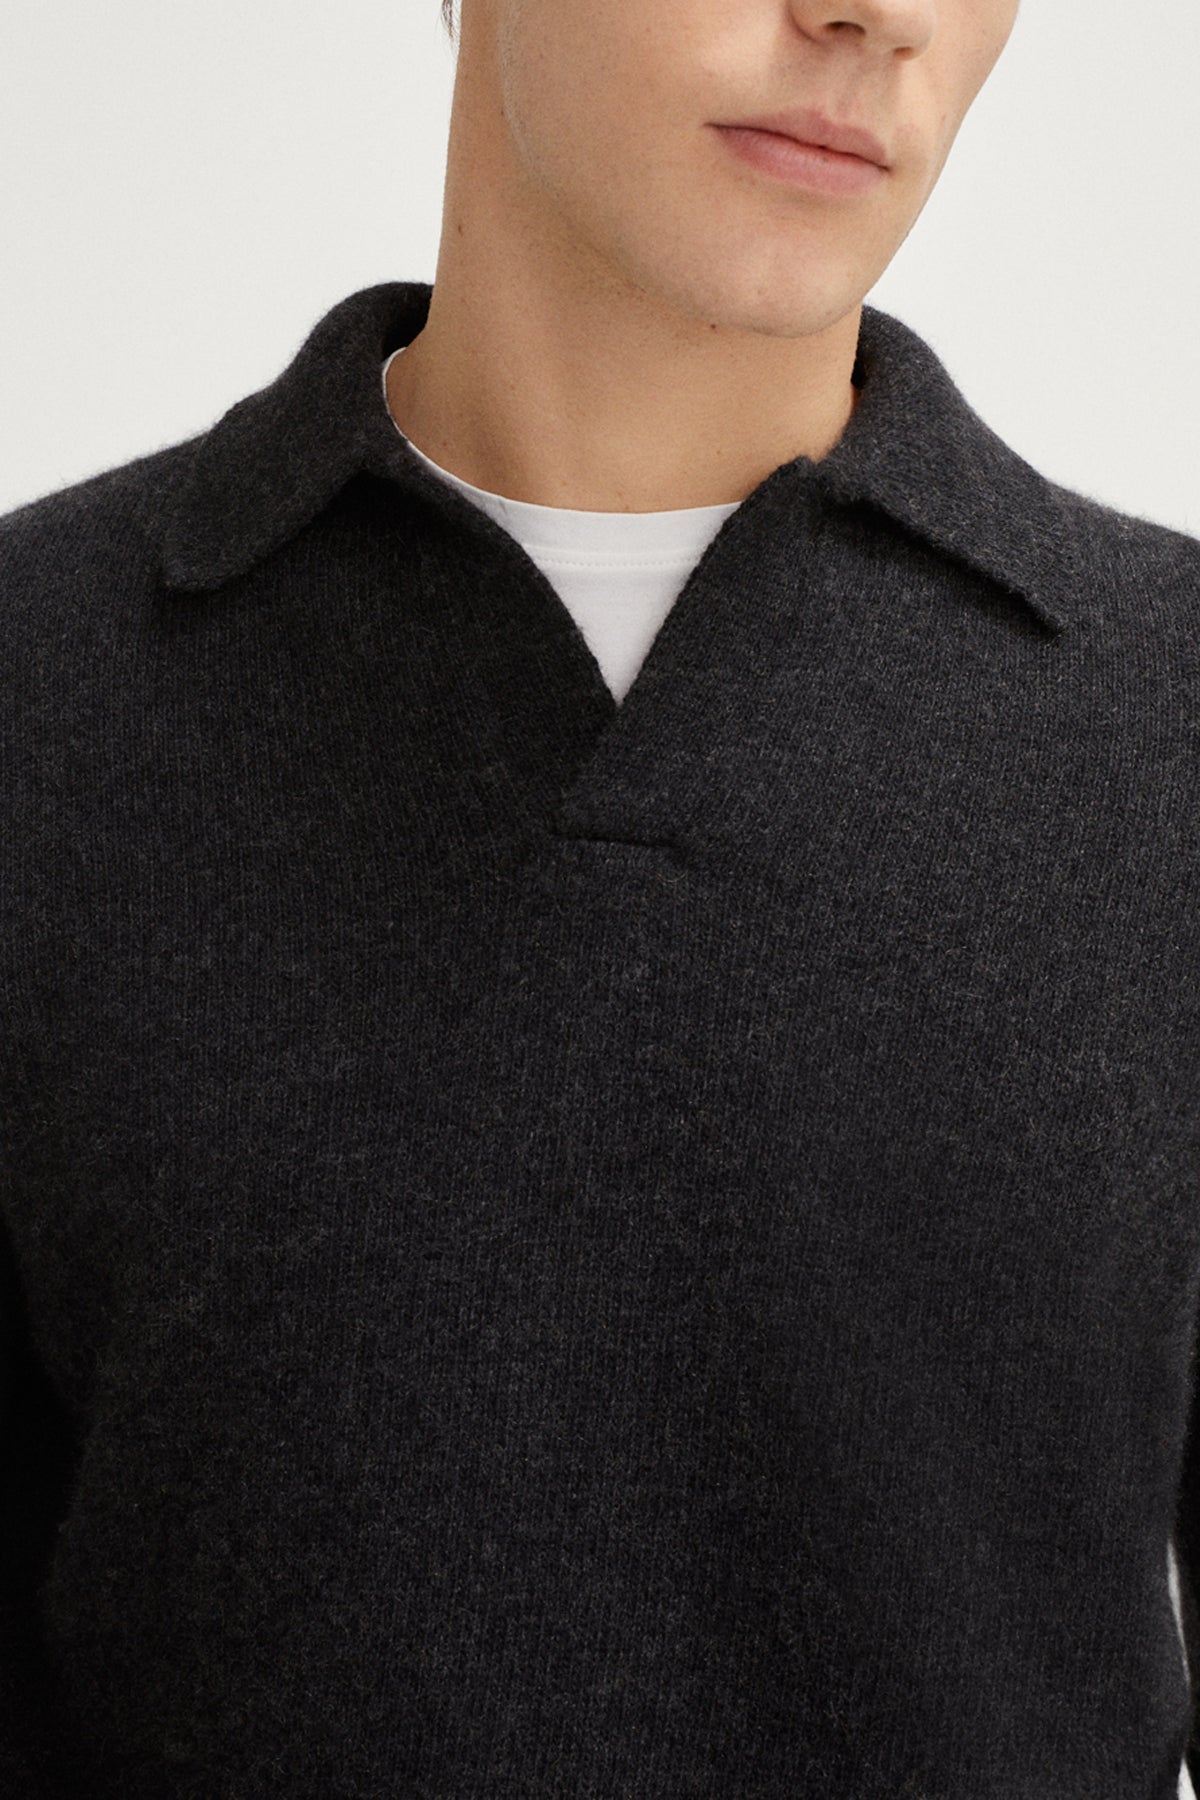 Anthracite Grey | The Upcycled Cashmere Polo – Imperfect Version